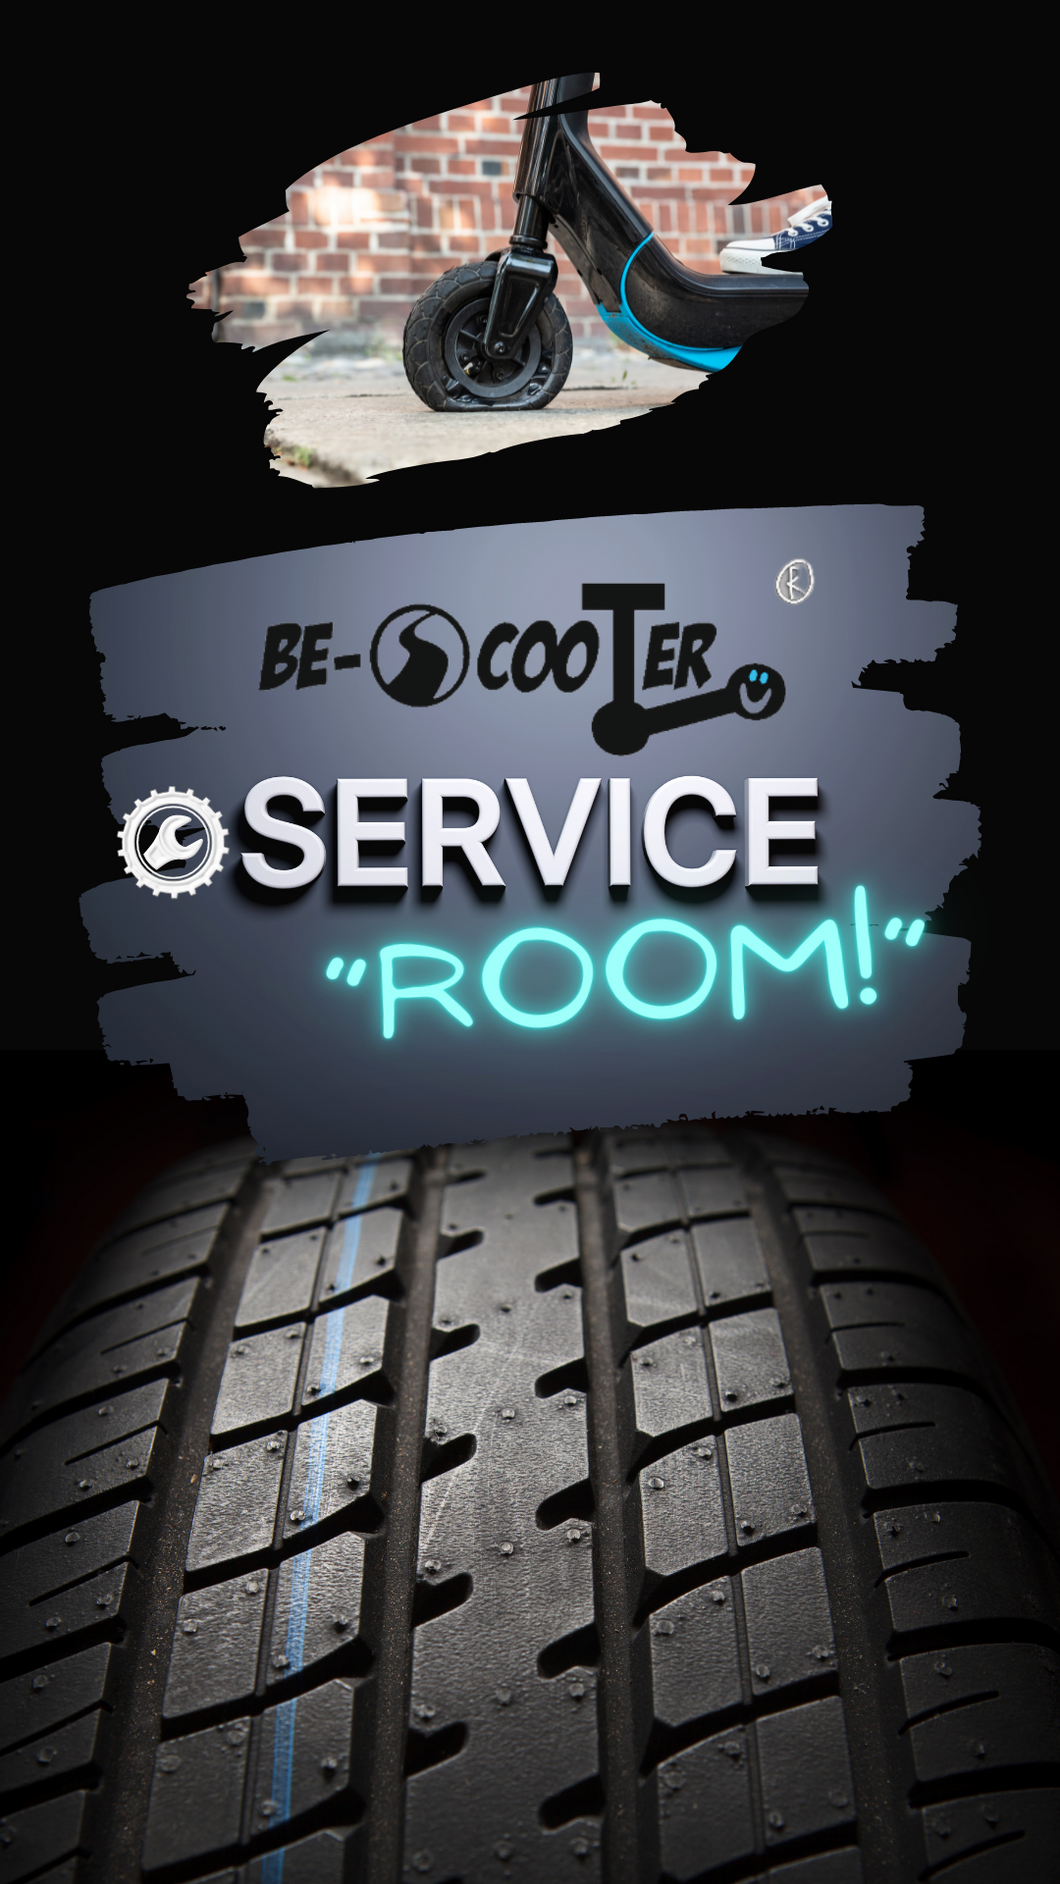 Reifenwechsel-Service by BE-SCooTER®